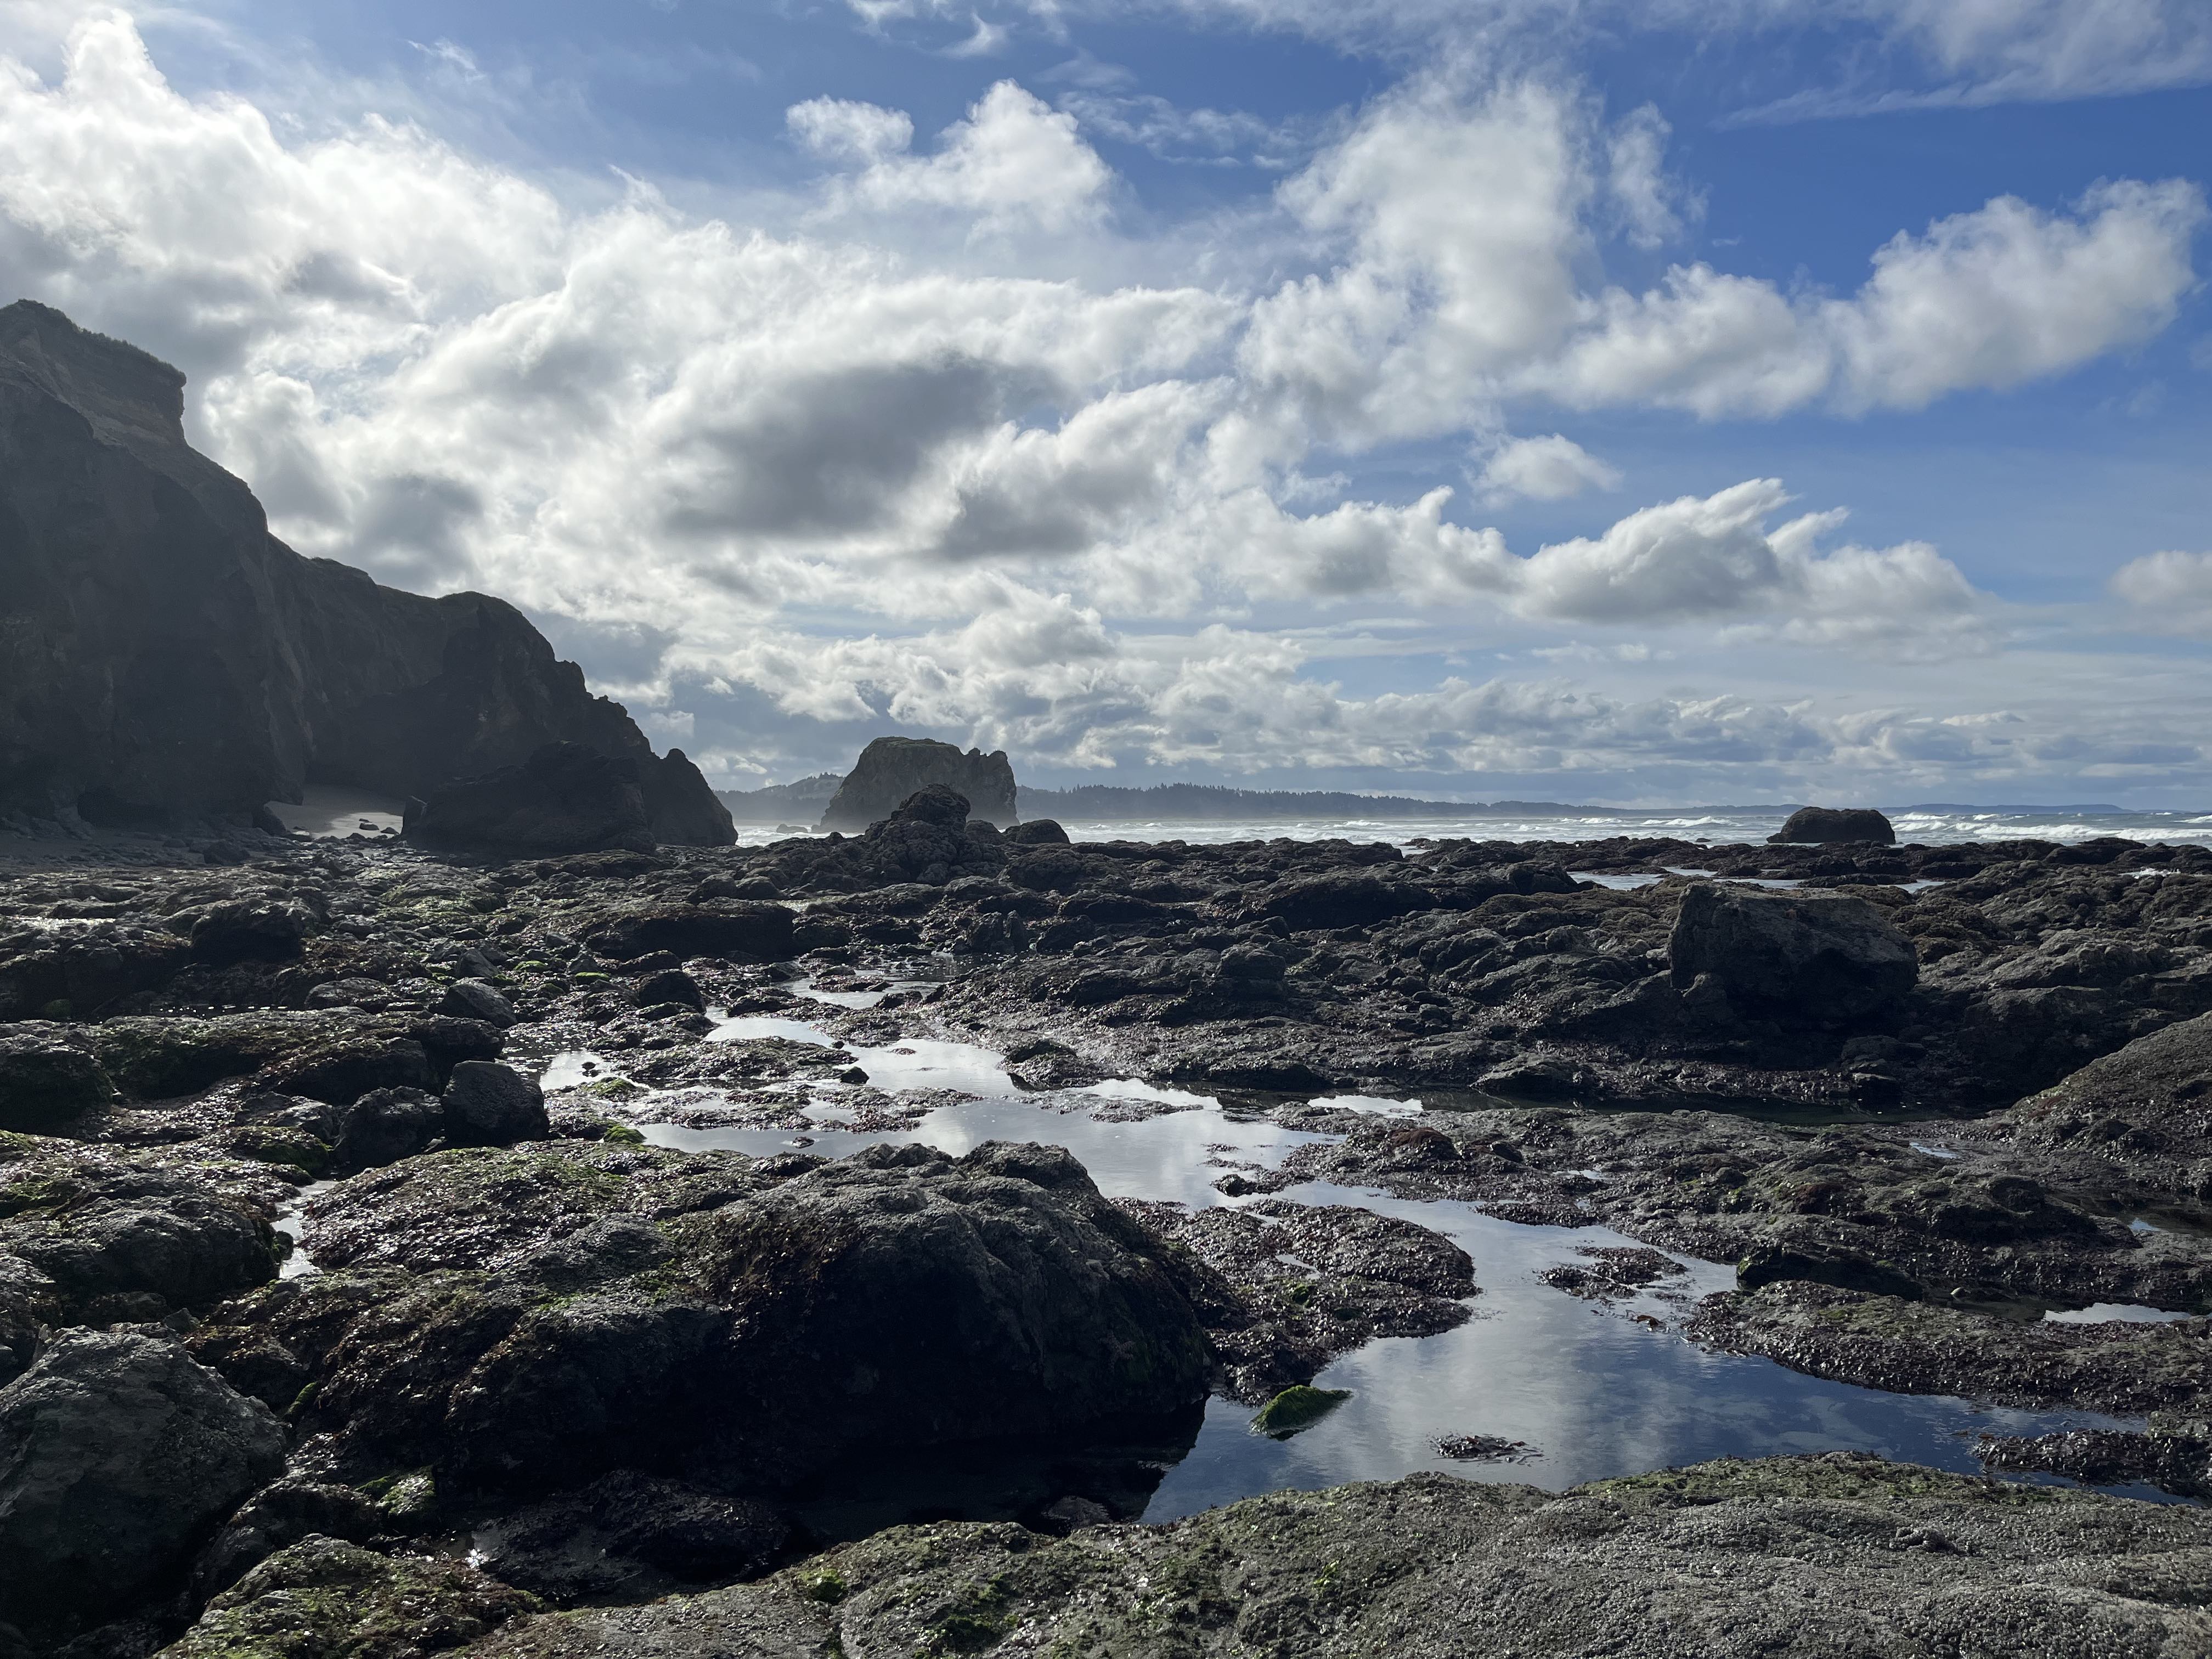 a rocky intertidal zone with clouds in the sky and sea stacks in the distance